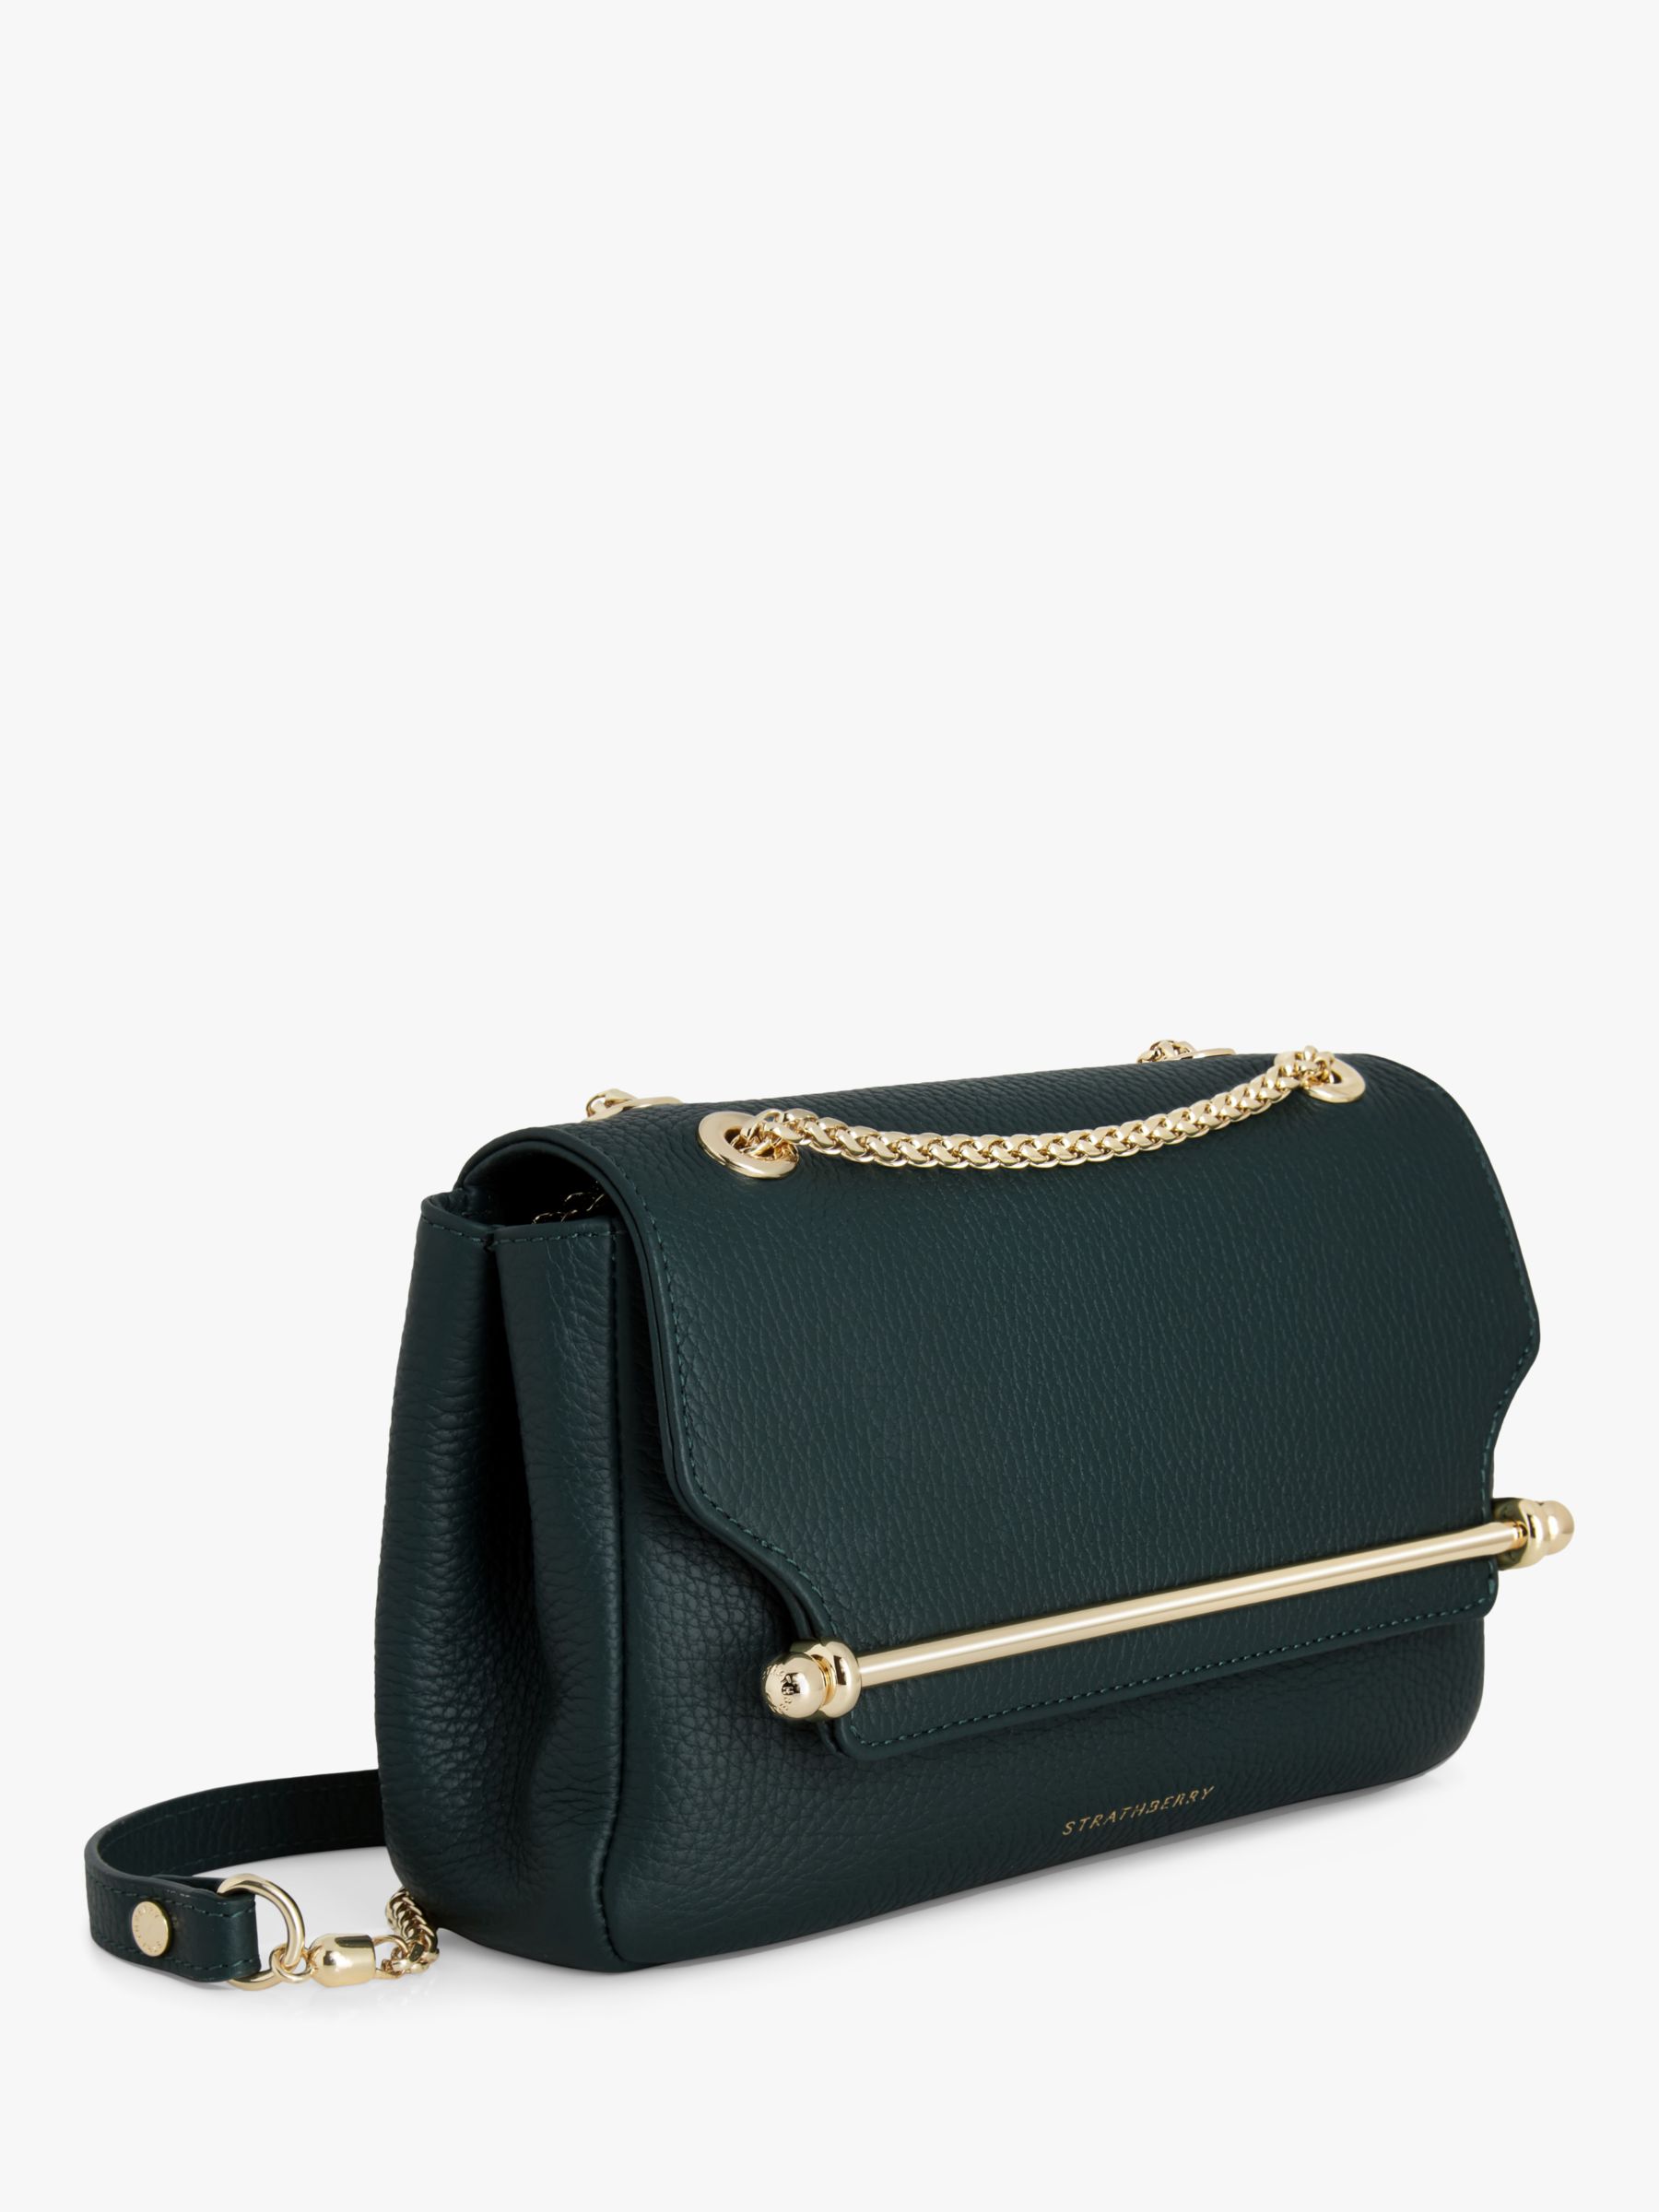 Buy Strathberry East/West Chain Strap Mini Leather Cross Body Bag Online at johnlewis.com